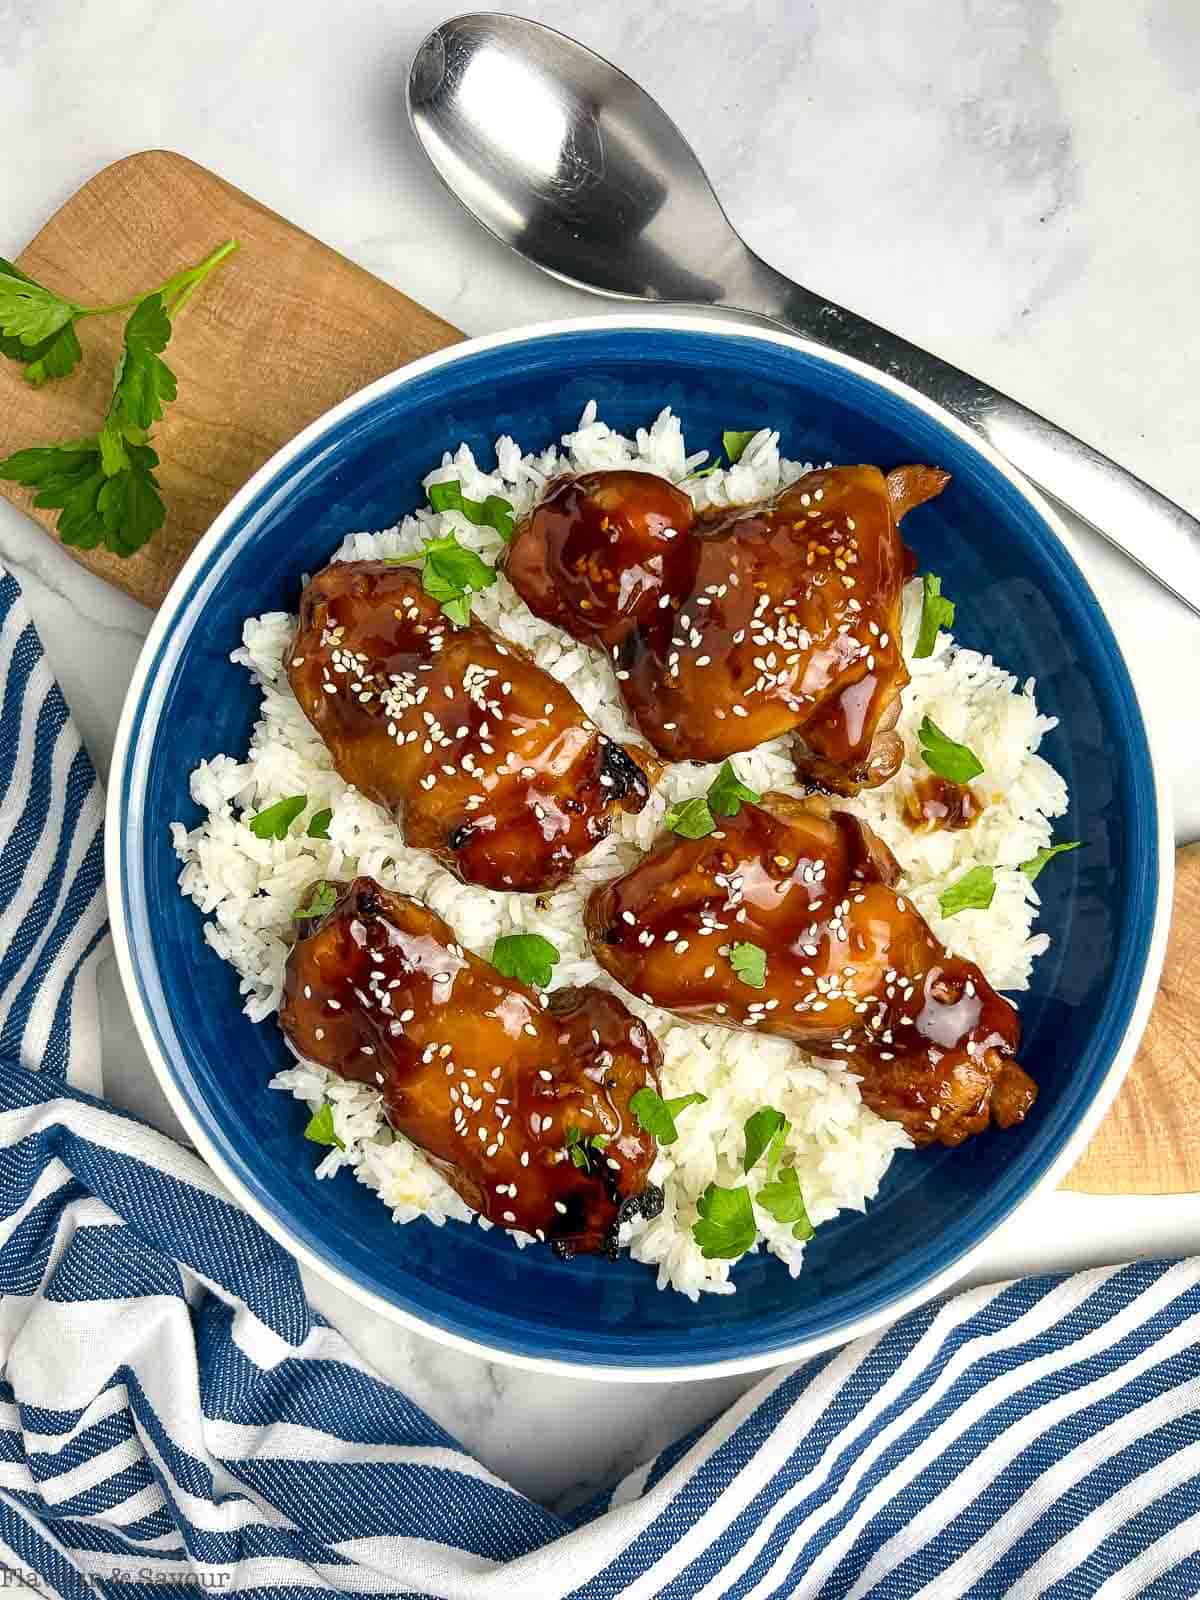 Teriyaki sauce on chicken thighs on a bed of rice.